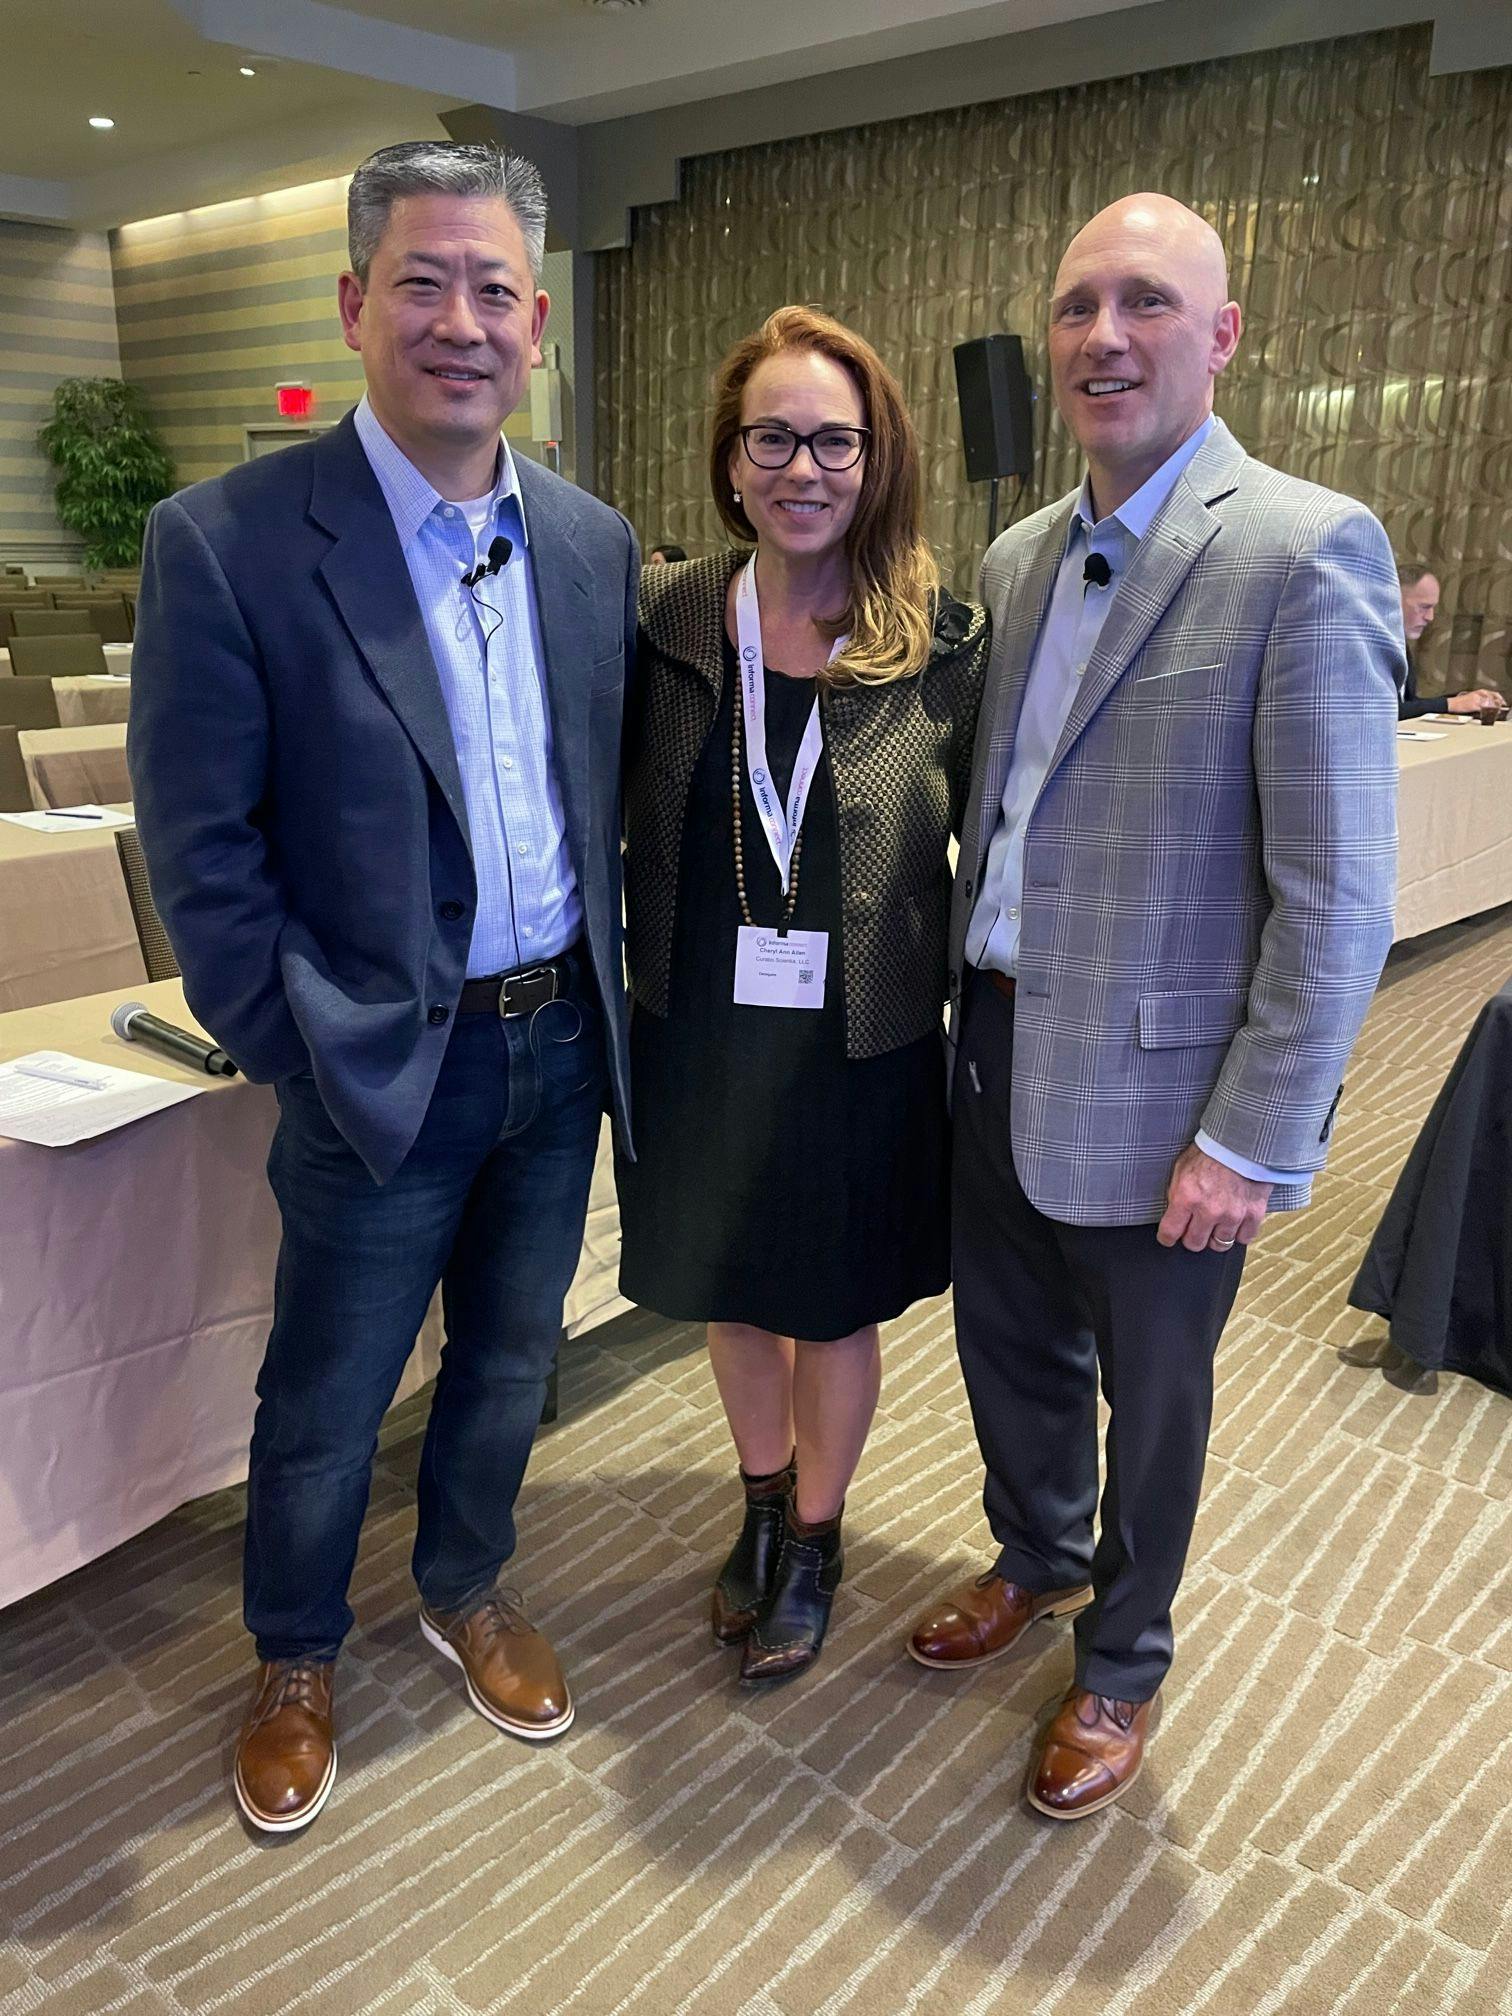 From left to right: Paul Chen, Cheryl Allen, and Spencer Miller of the "Enable Holistic Hub and Provider Services" panel. December 12, 2023. Trade & Channel Strategies, Philadelphia, Pa. Image Credit: Nicholas Saraceno.